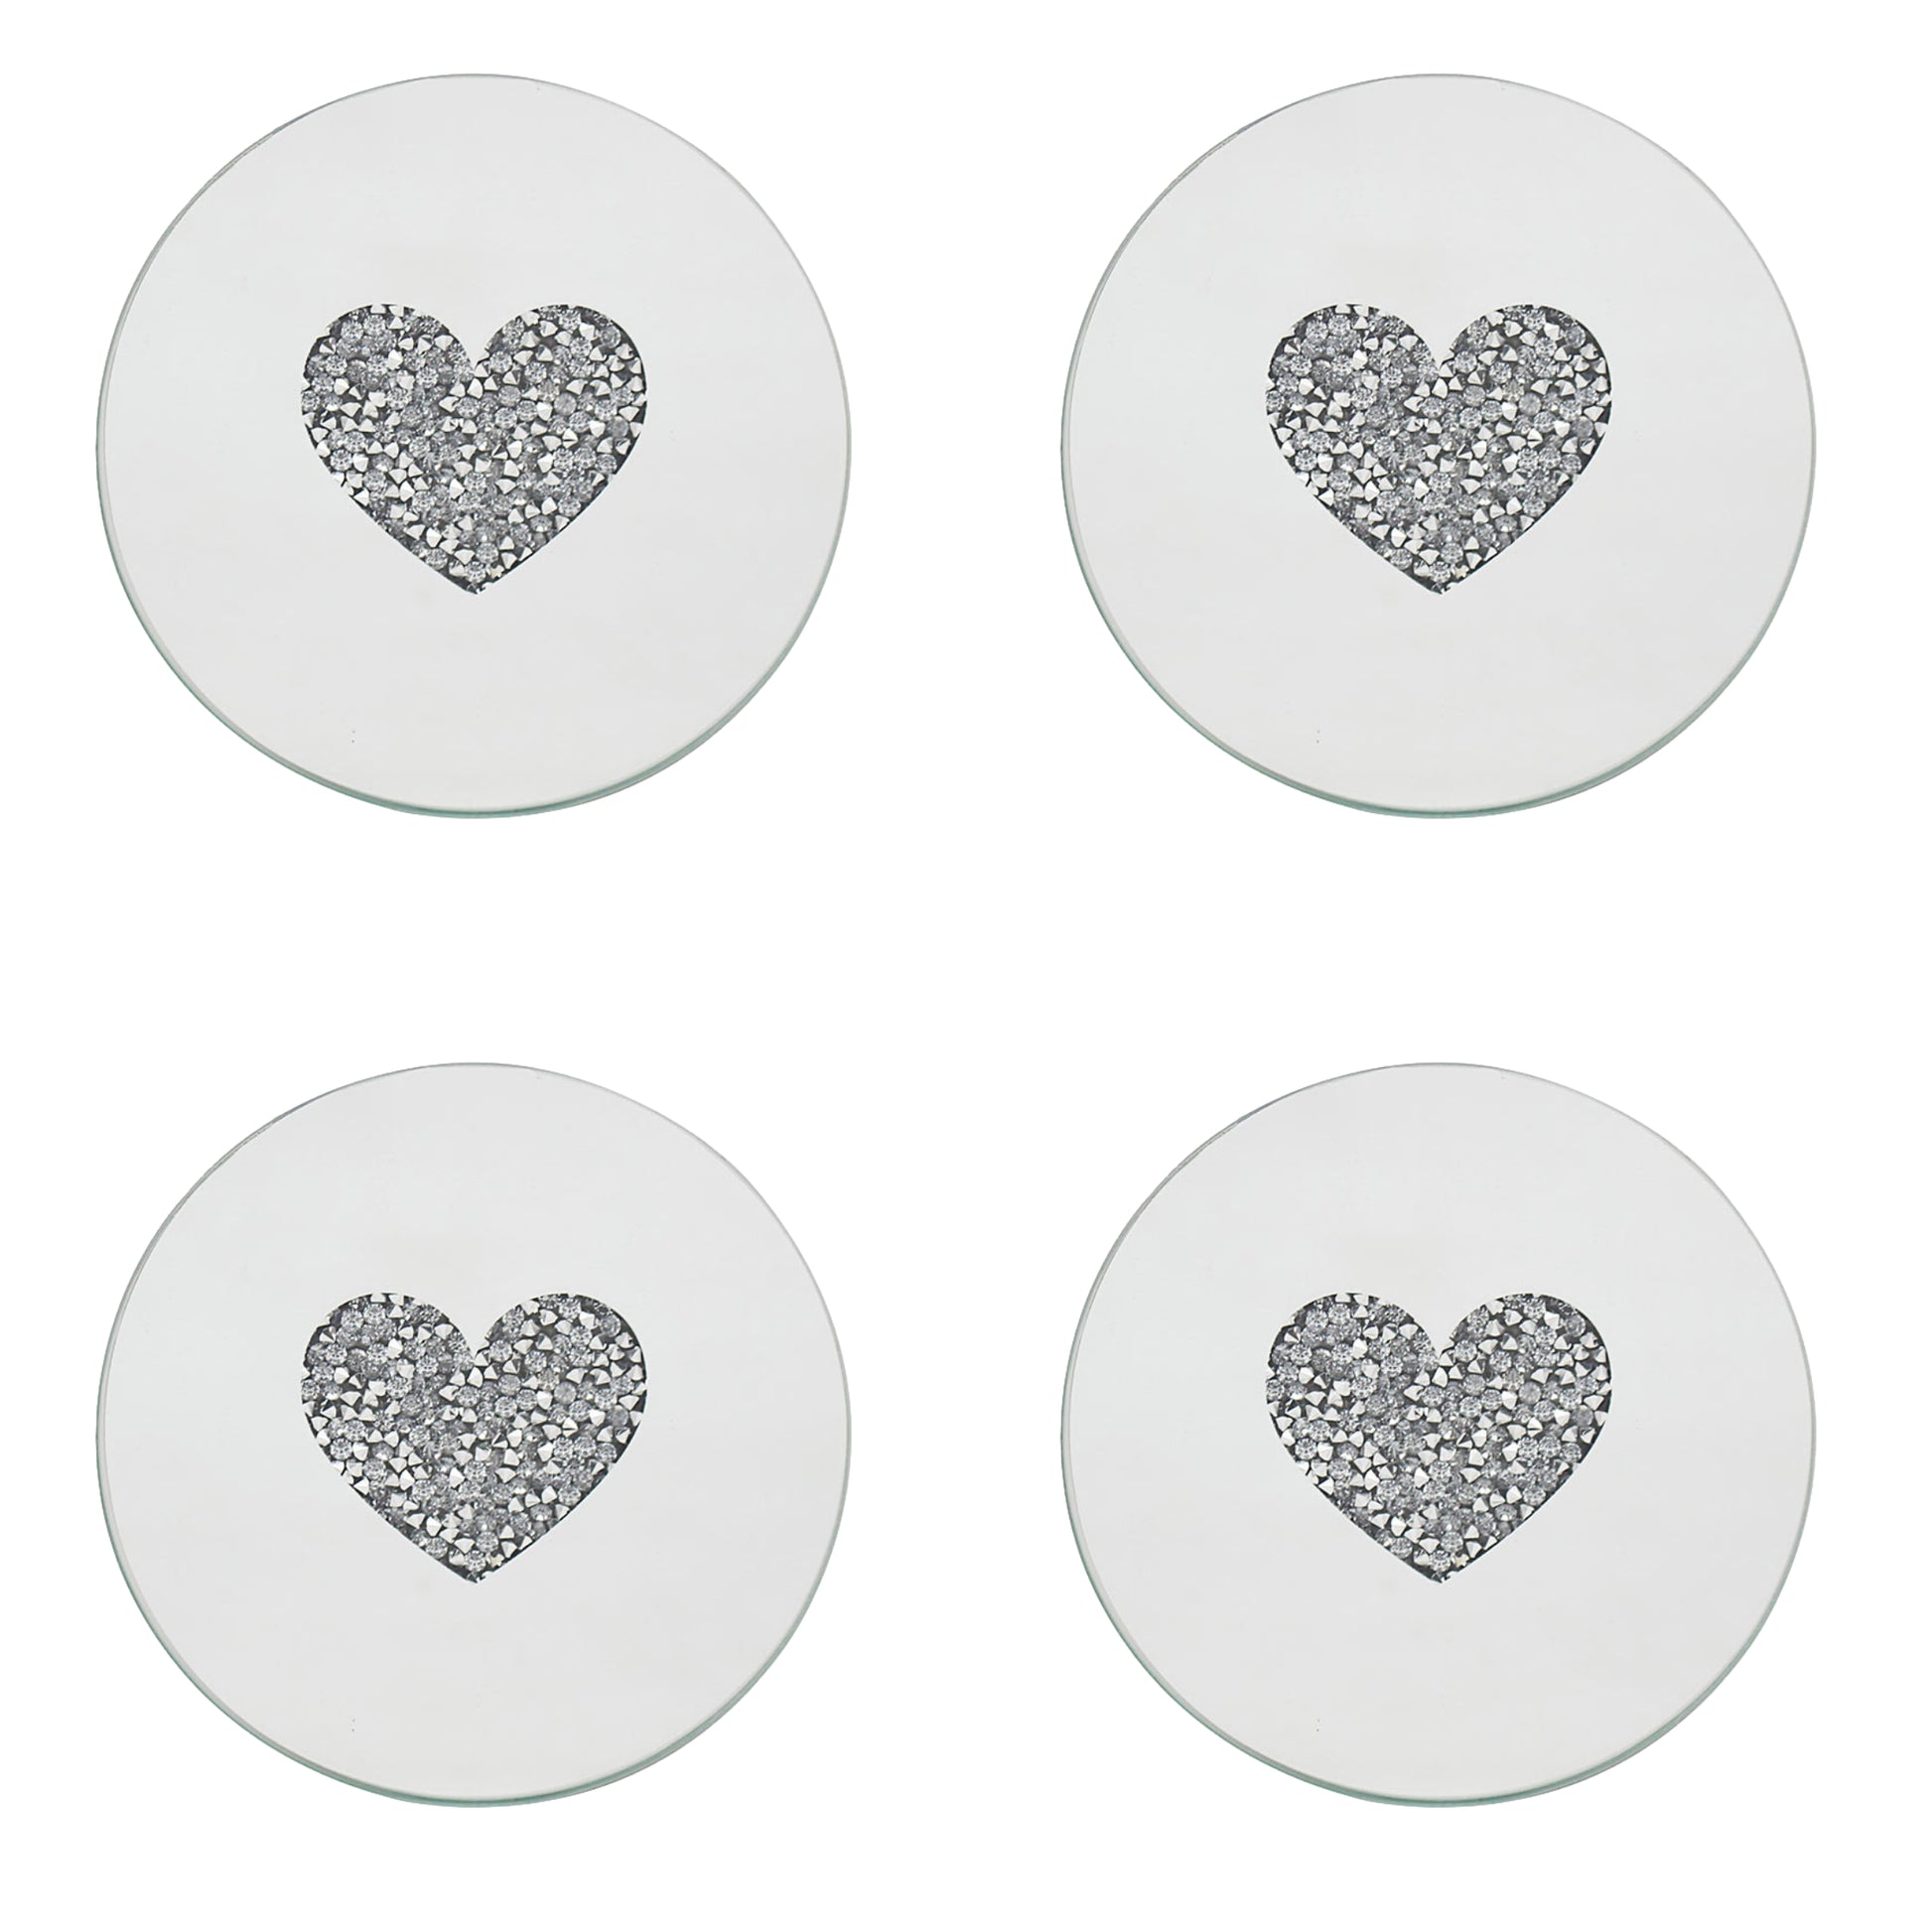 Set of 4 10cm Mirrored Round Candle Plate - Multi Crystal Heart Diamante